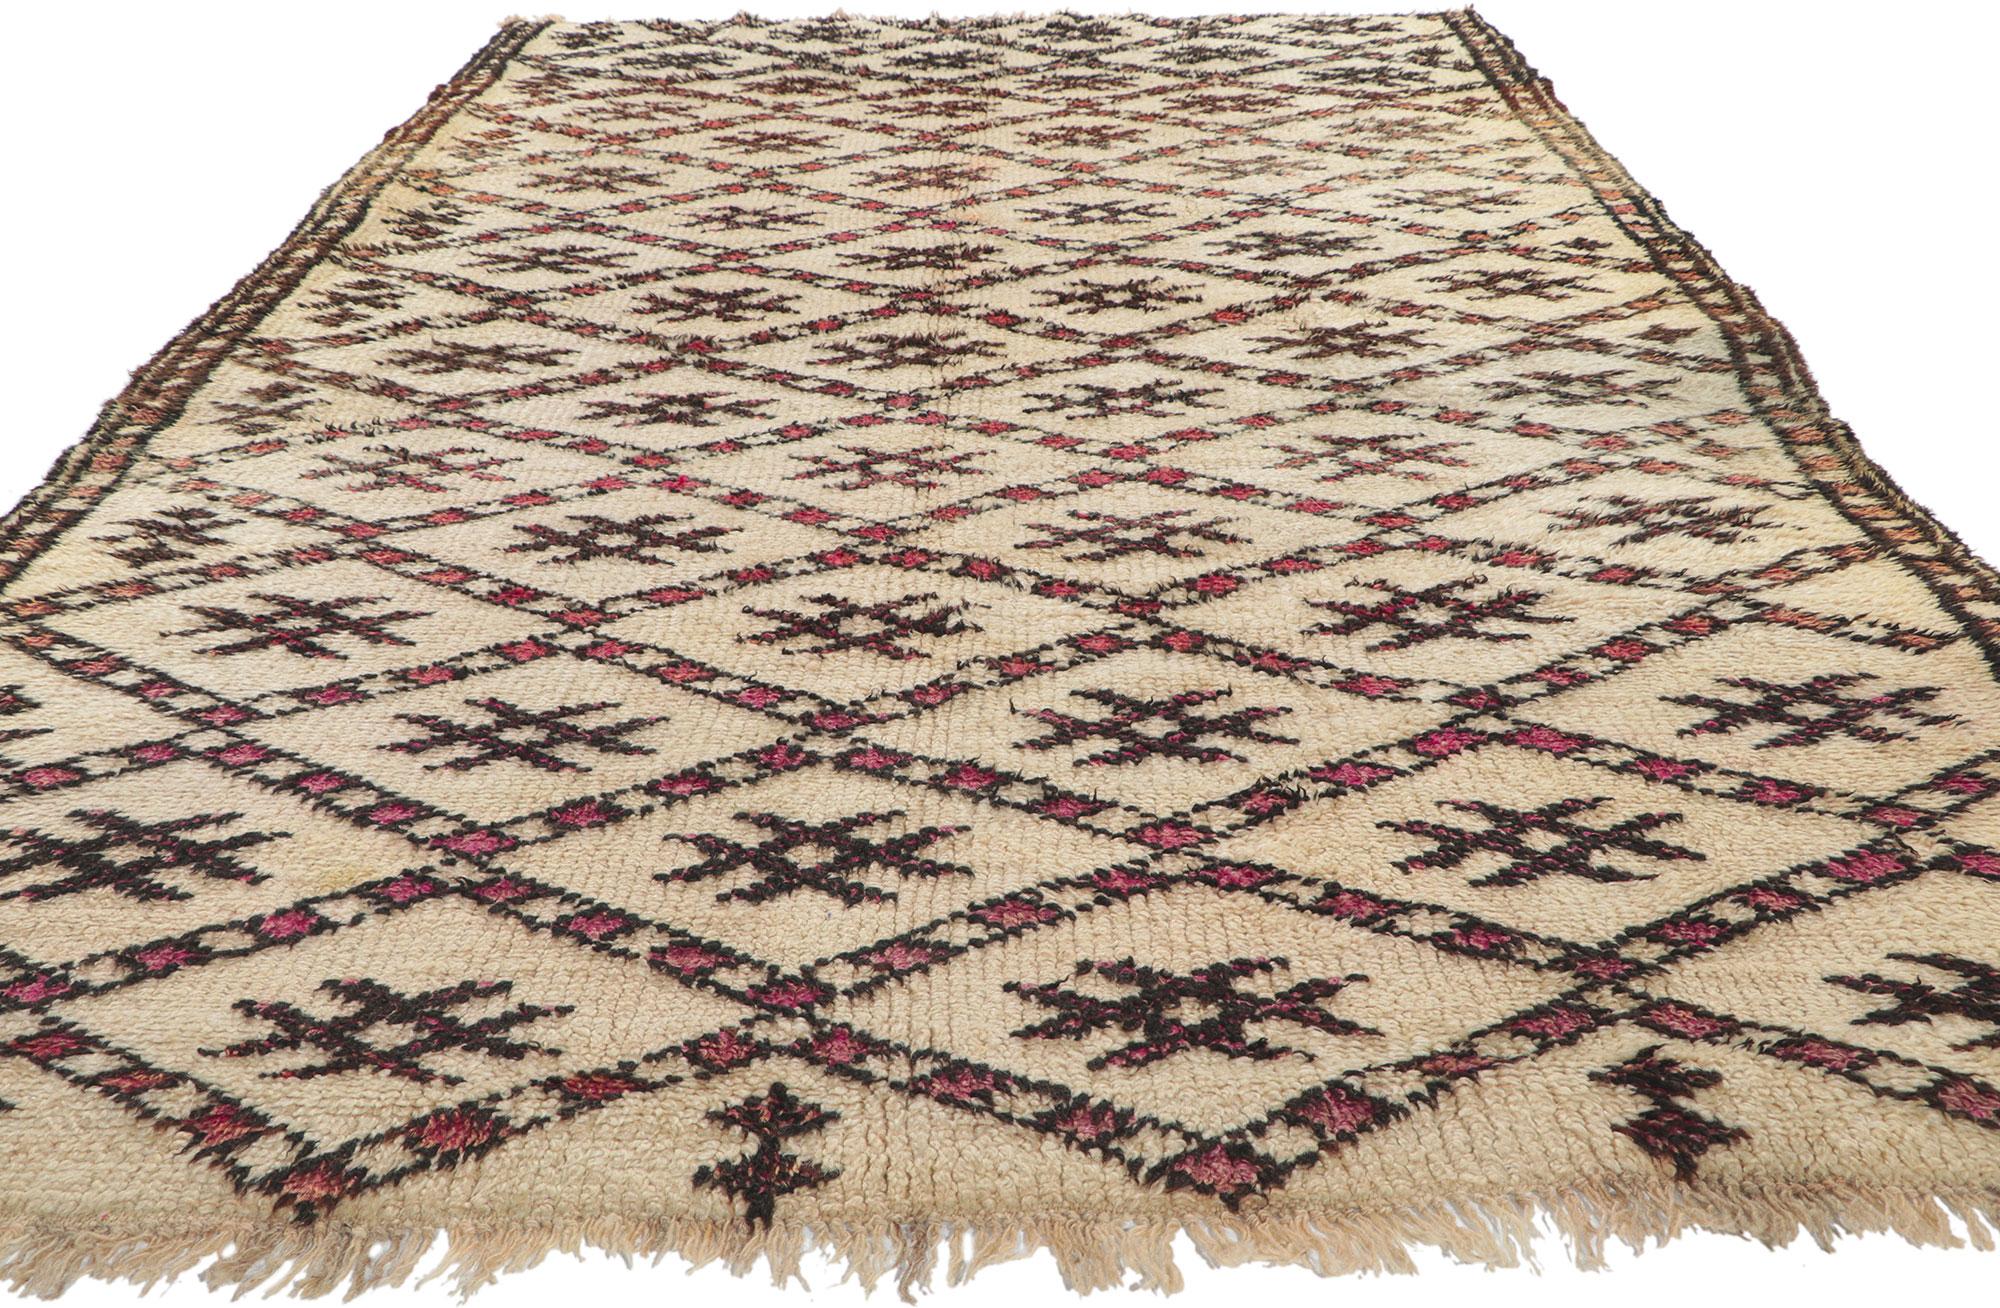 78366 Vintage Moroccan Beni Ourain Rug In Good Condition For Sale In Dallas, TX